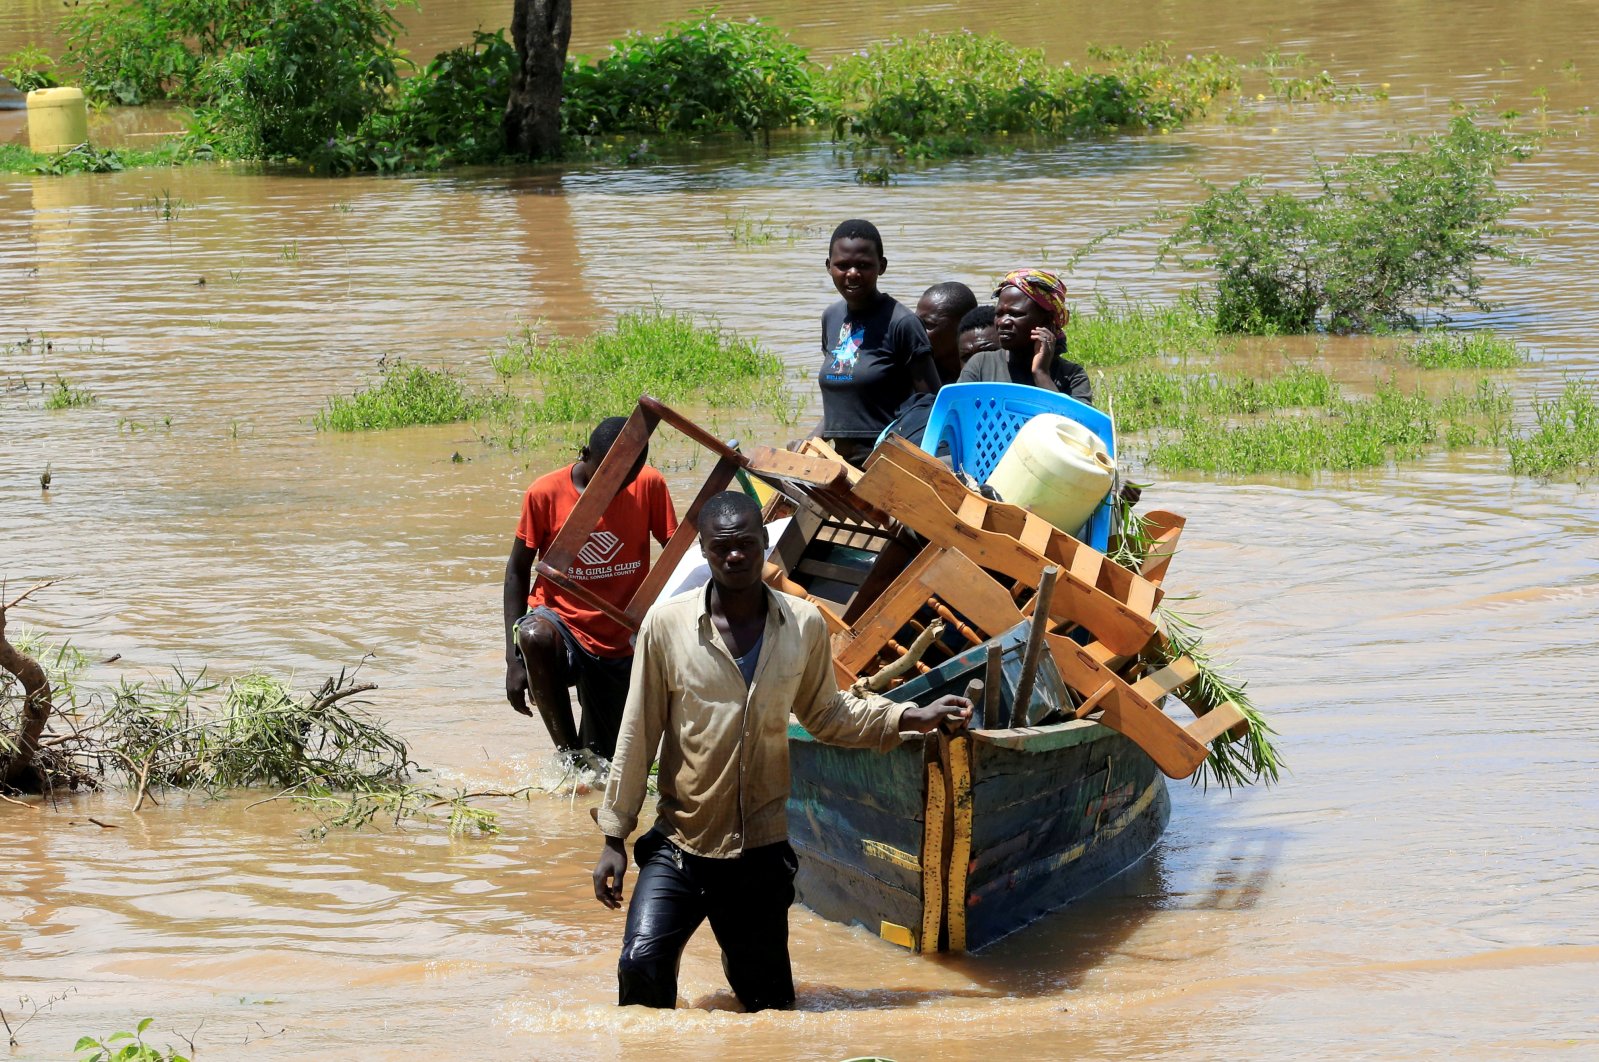 Residents use a boat to carry their belongings through the waters after their homes were flooded in Budalangi, in Busia County, Kenya, May 3, 2020. (Reuters Photo)